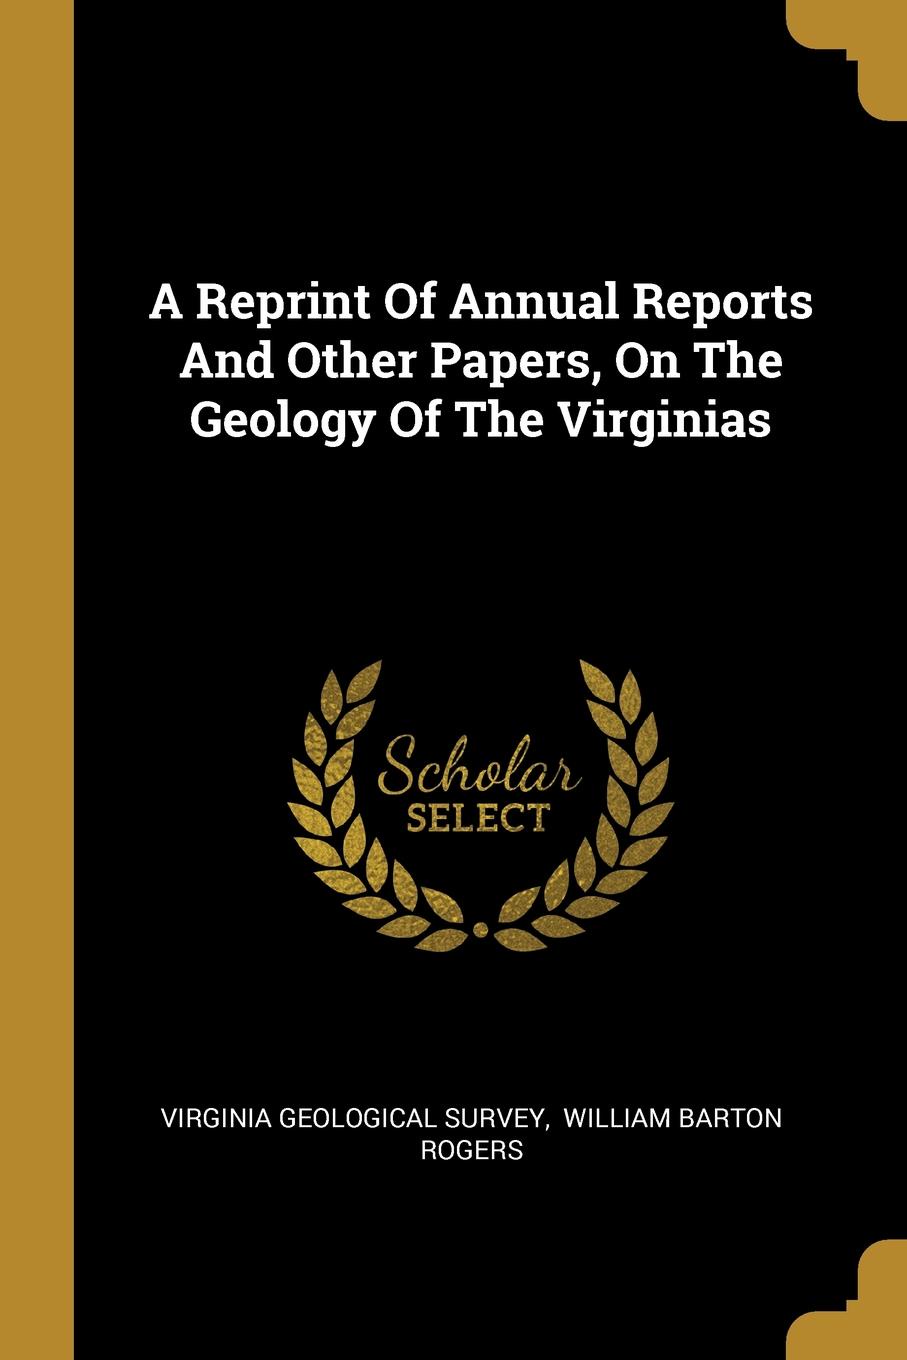 A Reprint Of Annual Reports And Other Papers, On The Geology Of The Virginias